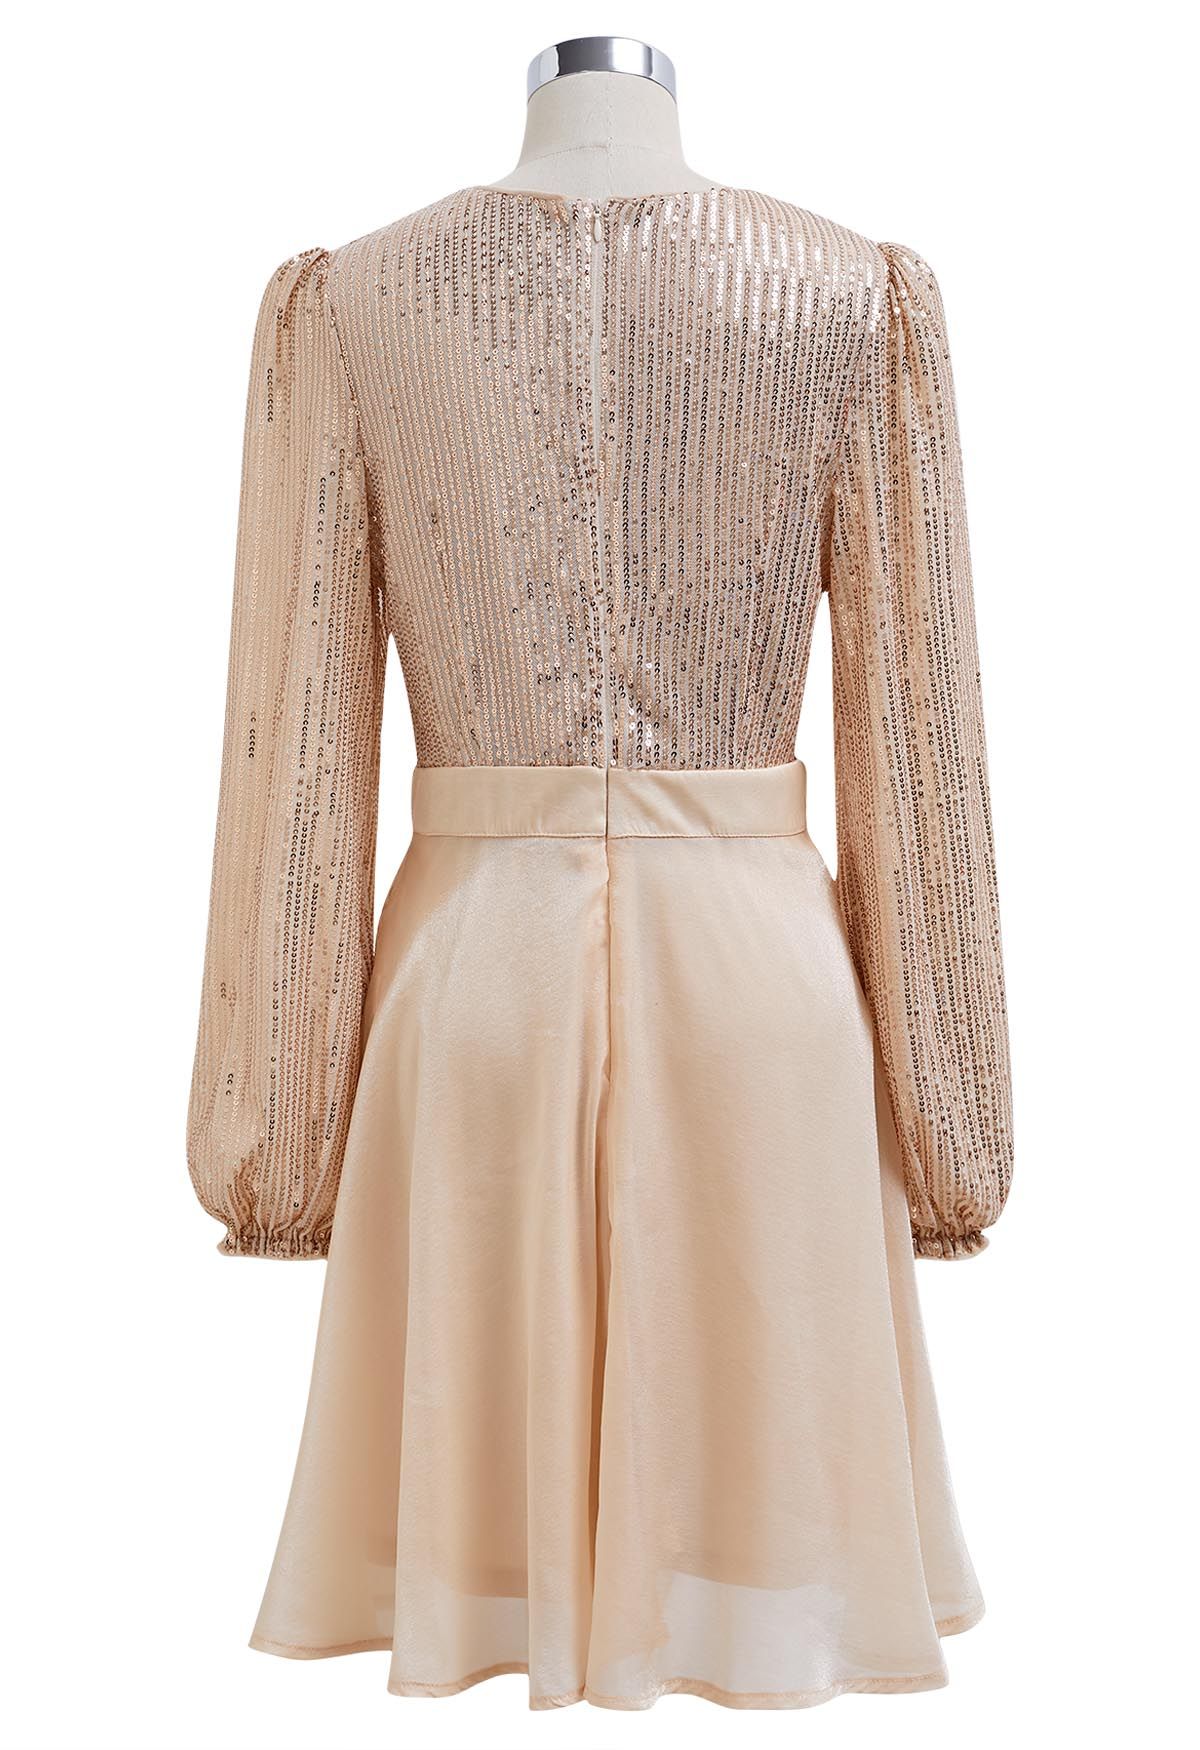 Plunging Spliced Sequined Skater Dress in Apricot